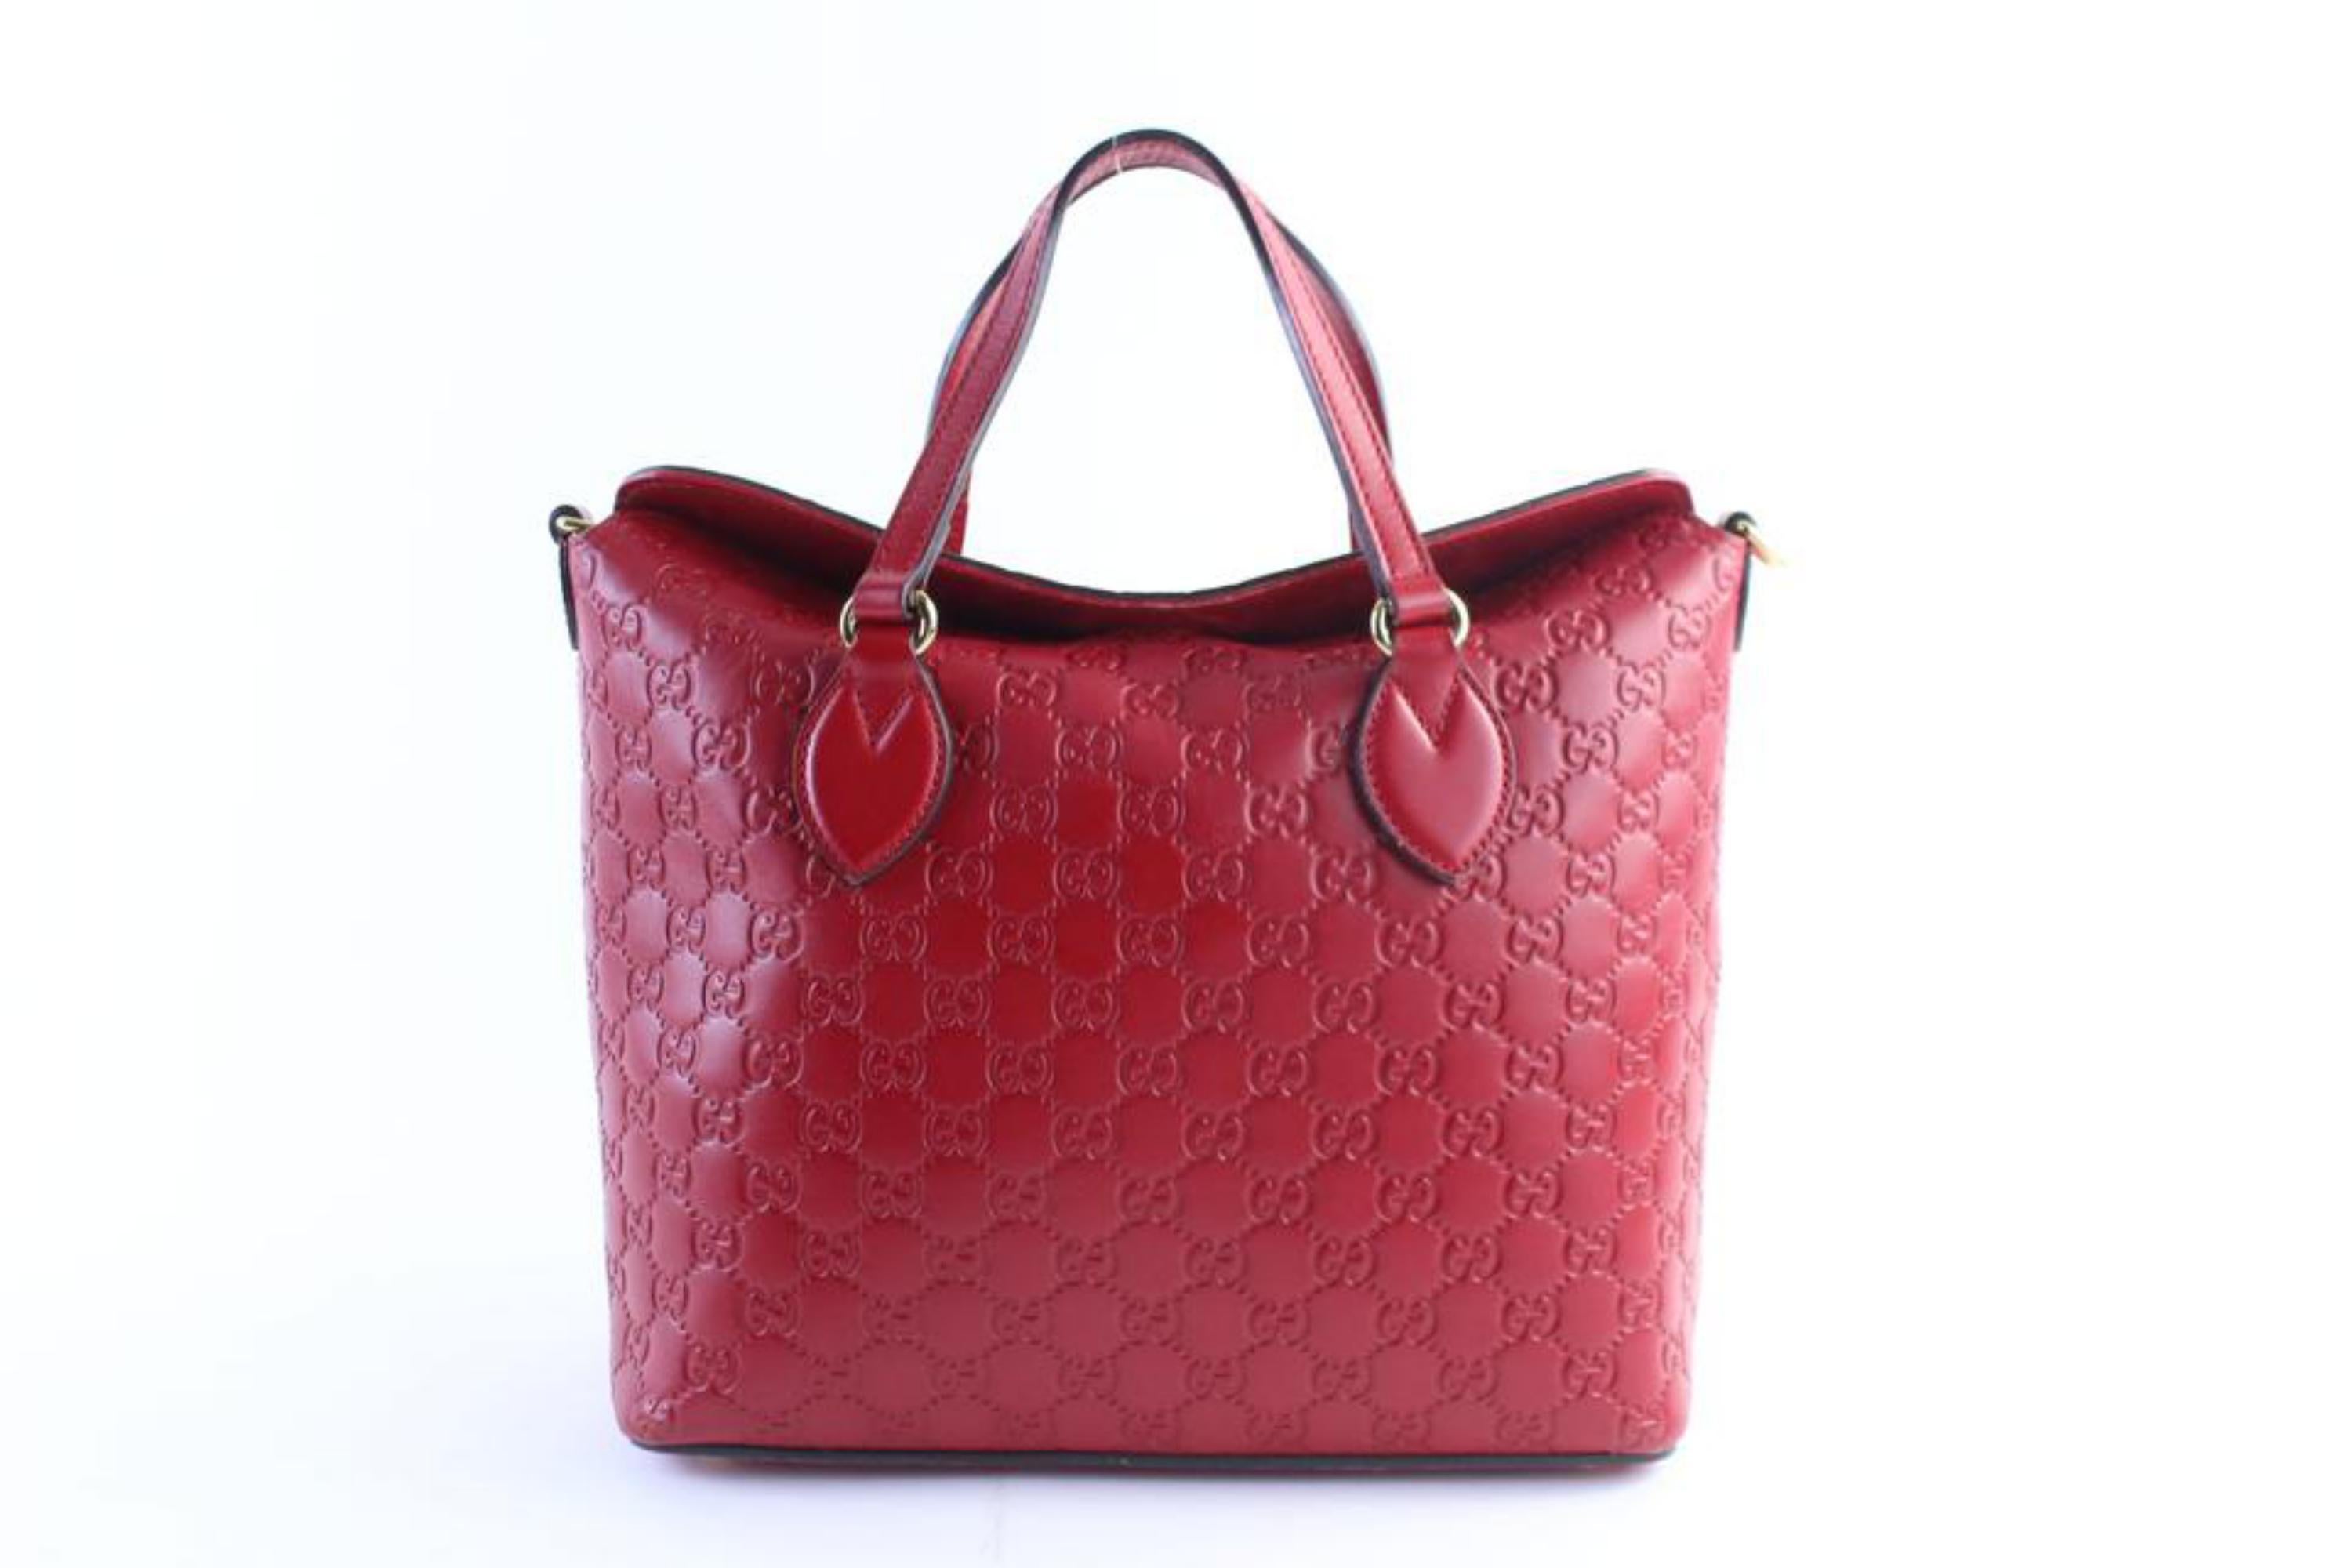 Gucci Top Handle Tote 11gr0606 Red Guccissima Leather Shoulder Bag For Sale 3